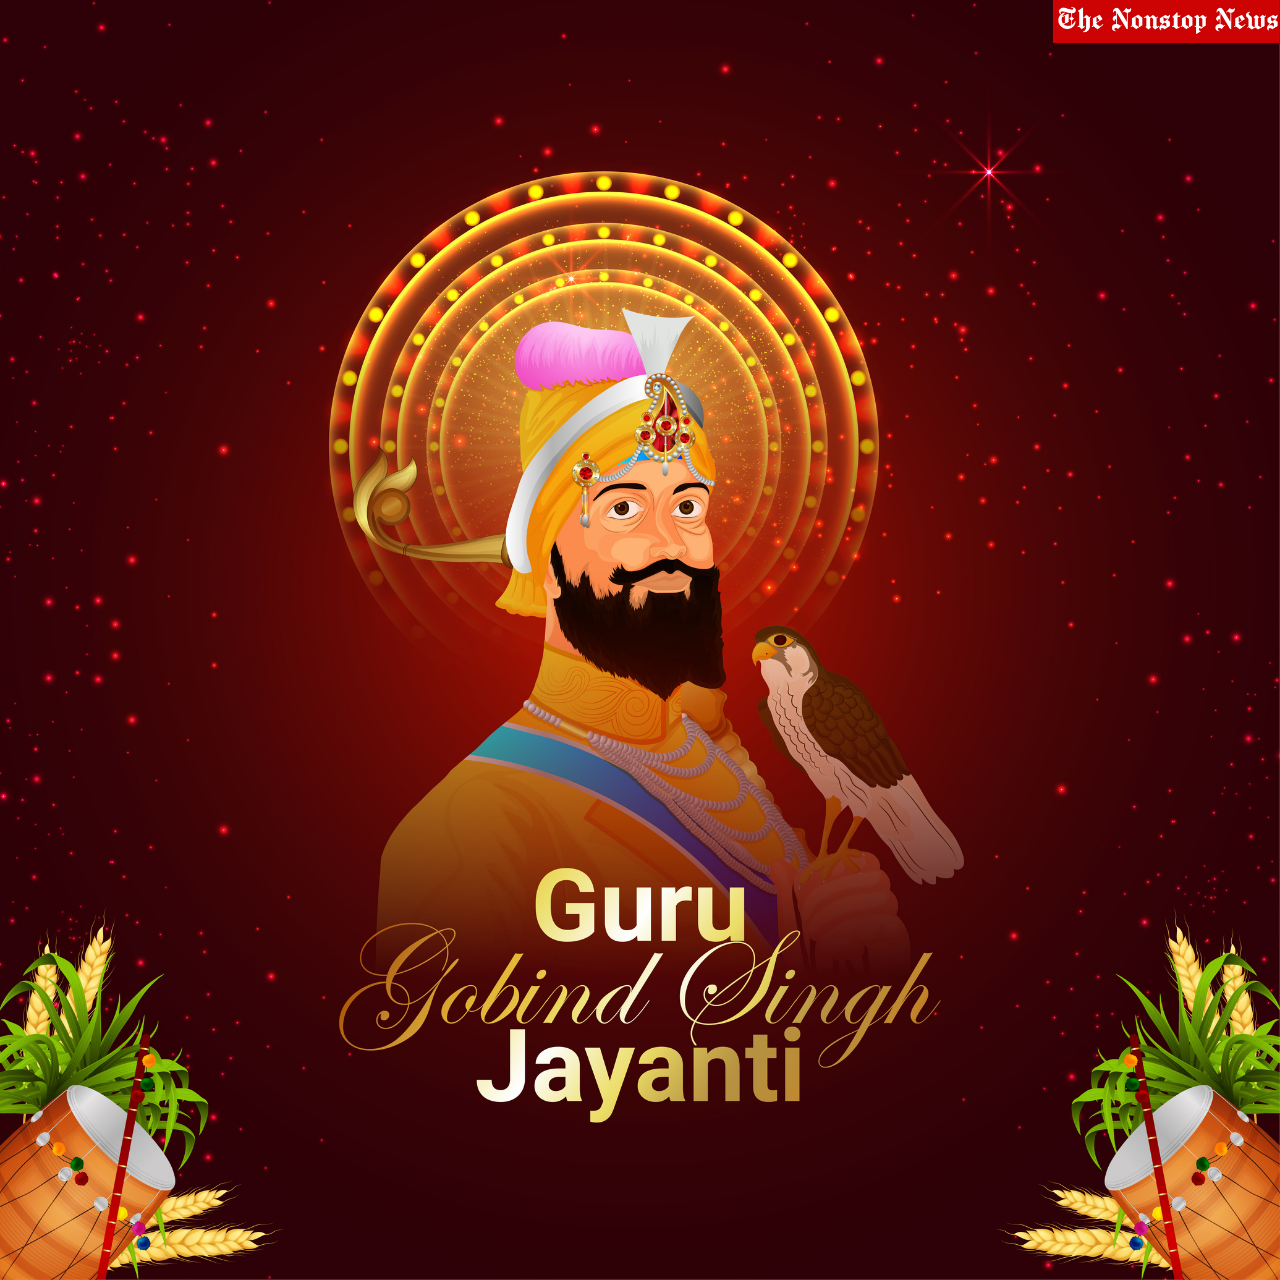 Guru Gobind Singh Jayanti 2022 Instagram Captions, Facebook Post, Twitter Greetings, Messages, and Reddit Quotes to Share